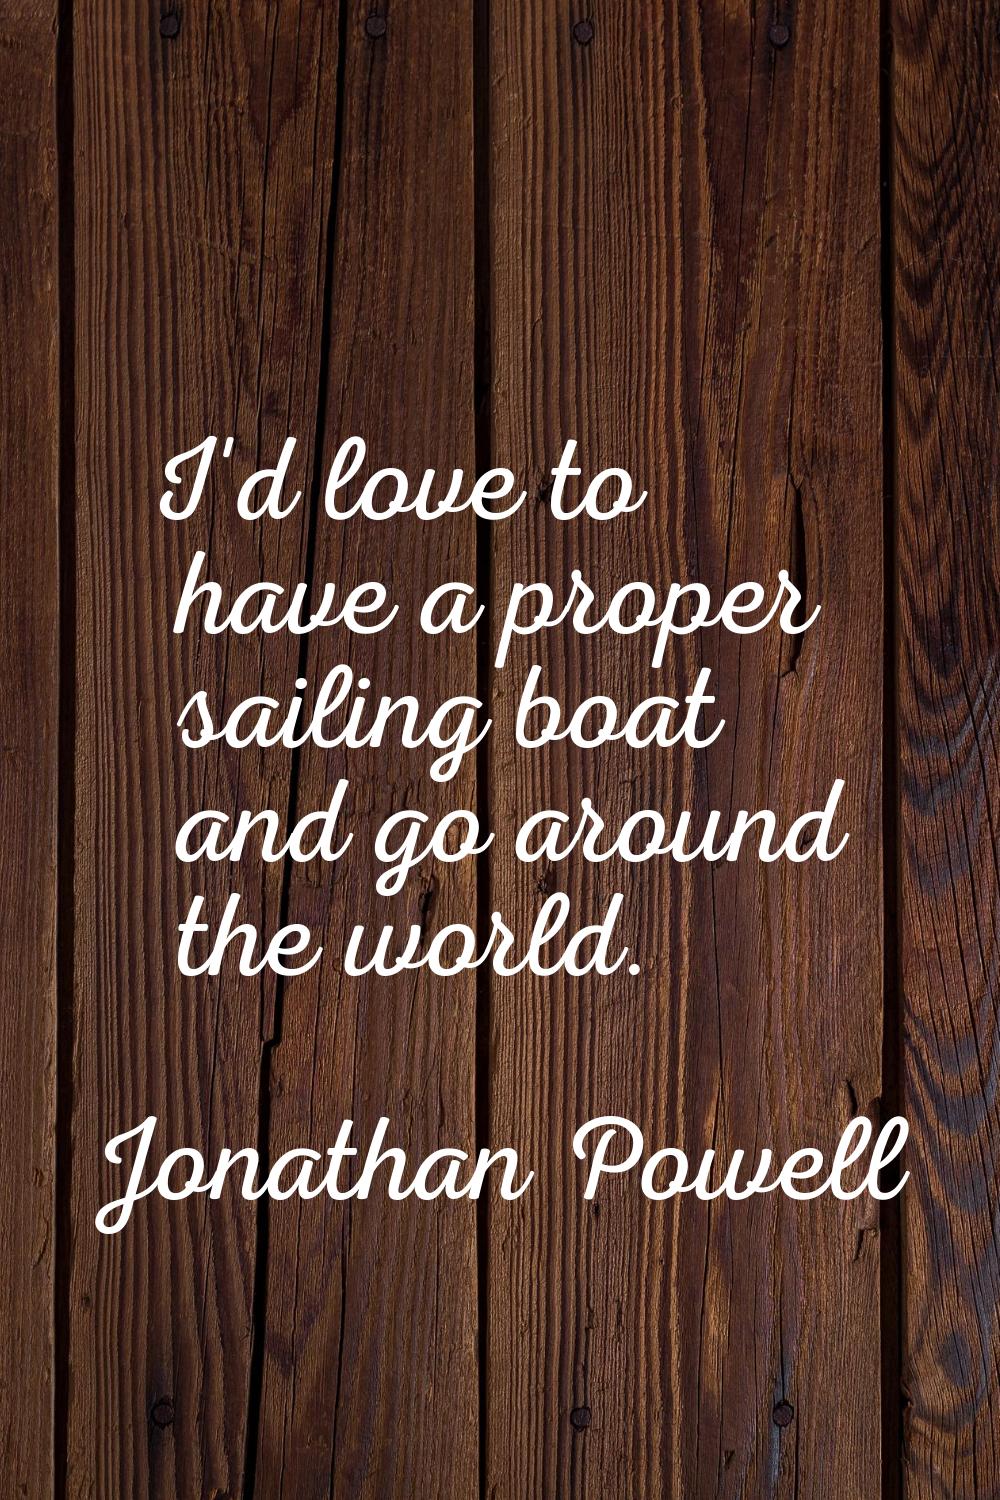 I'd love to have a proper sailing boat and go around the world.